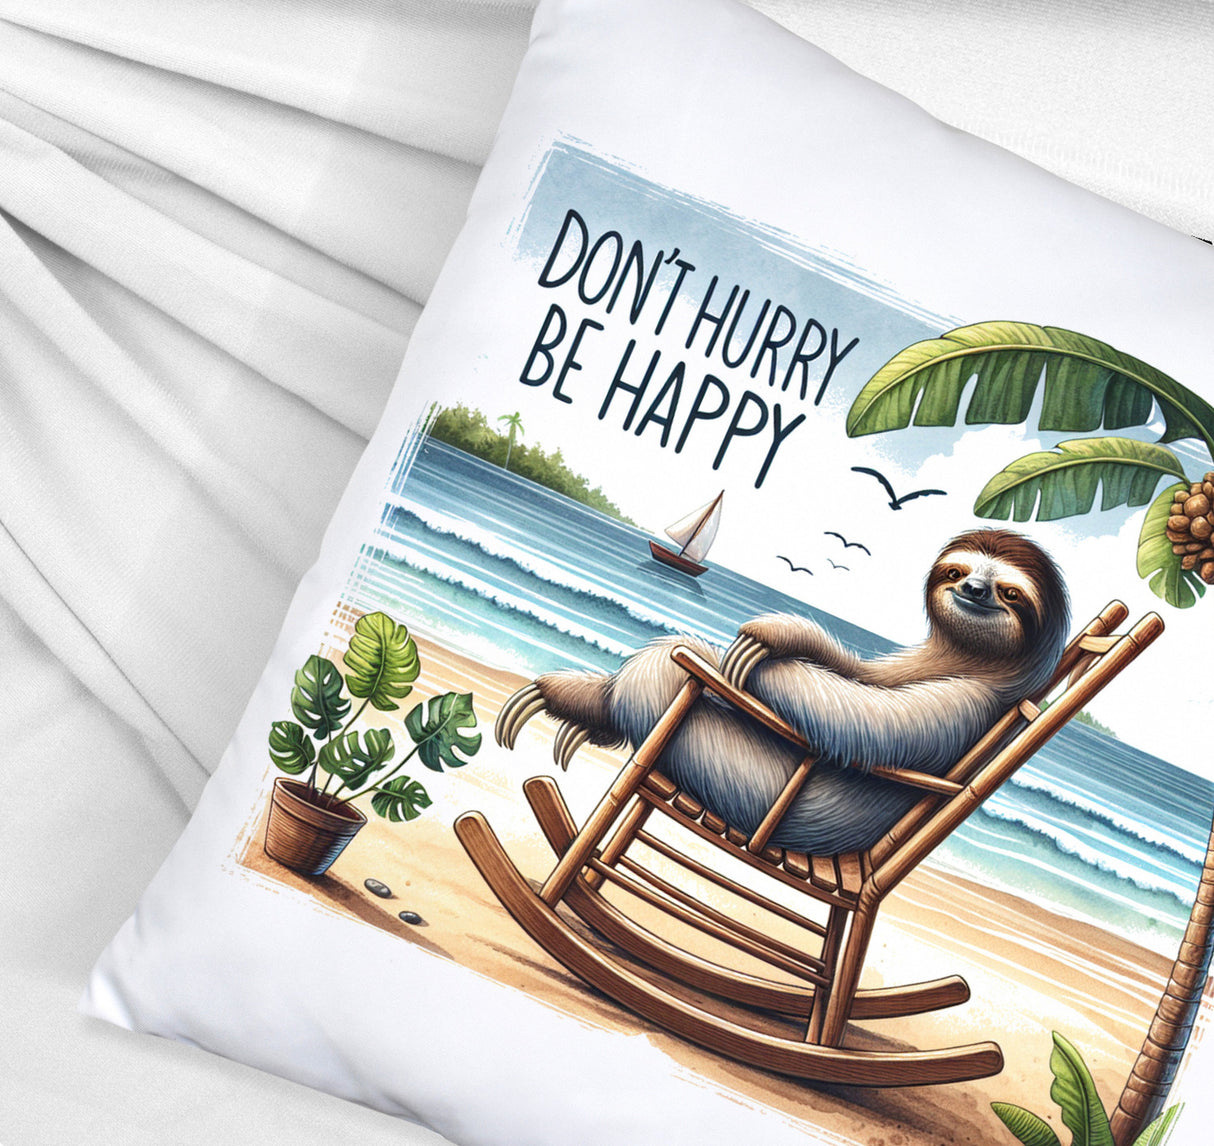 Faultier am Strand Kissen mit Spruch Don't hurry - be happy